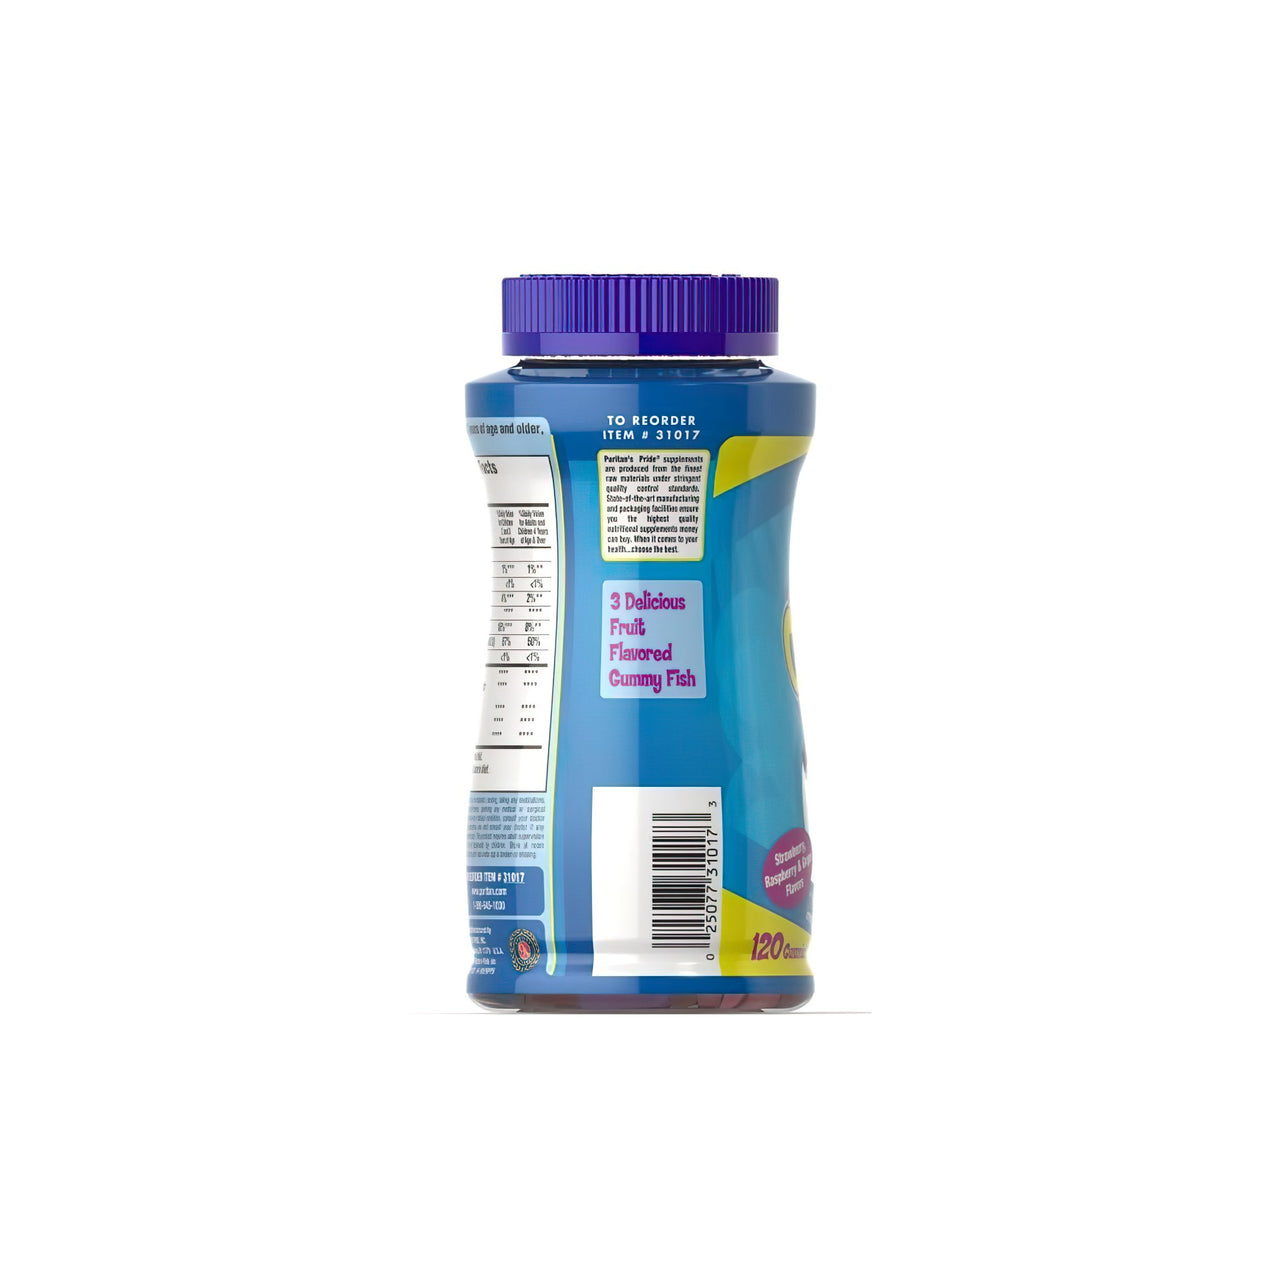 A bottle of Puritan's Pride Children's Omega 3, DHA & D3 120 Gummies with a blue lid on a white background.